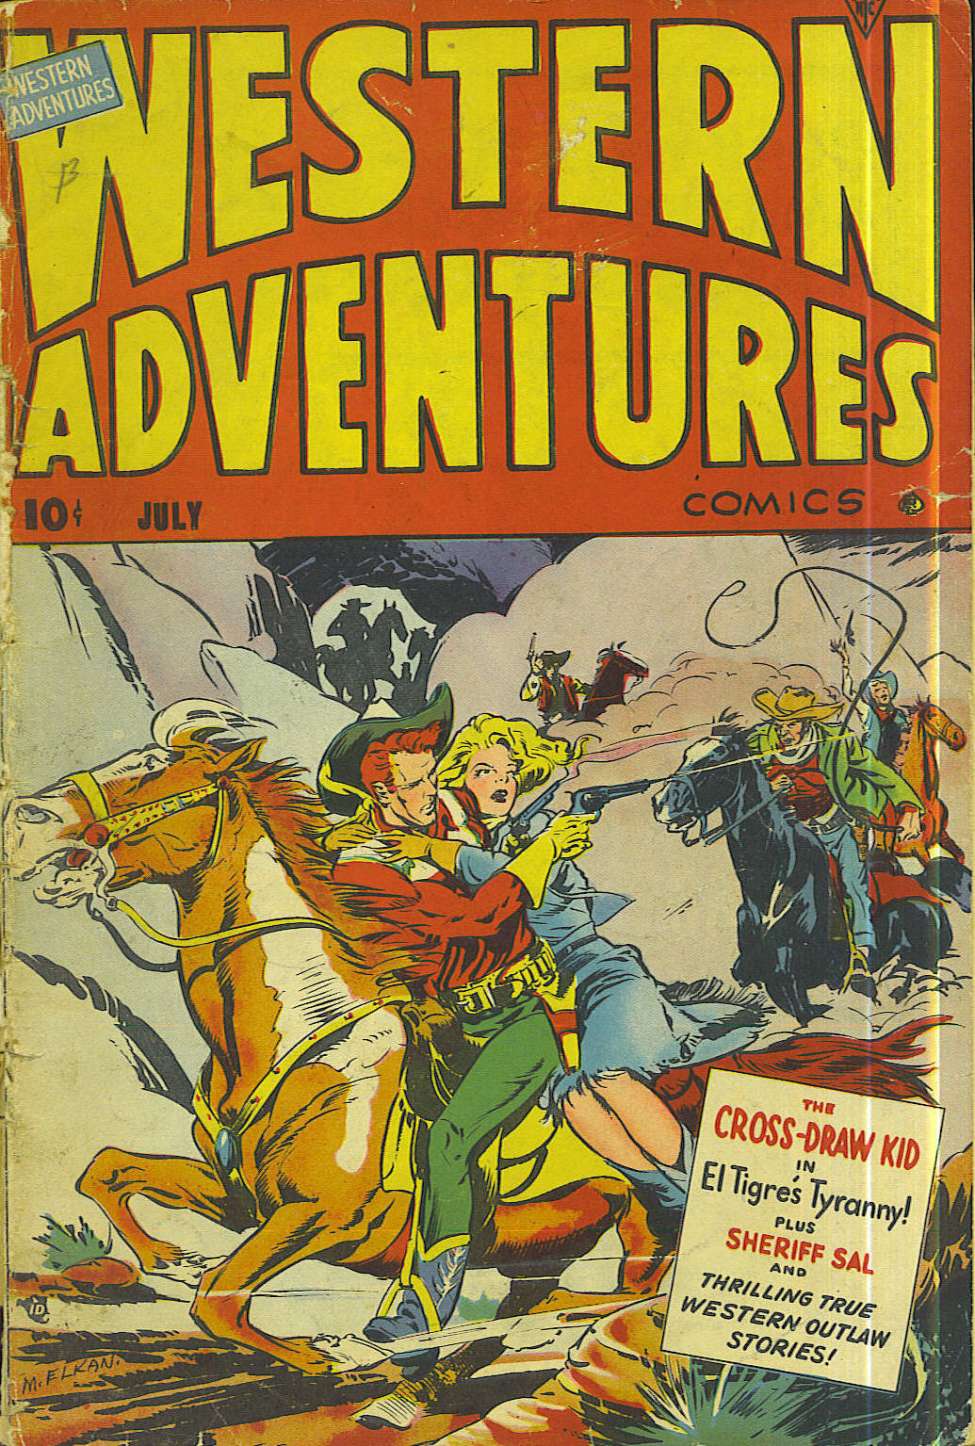 Book Cover For Western Adventures 4 - Version 1